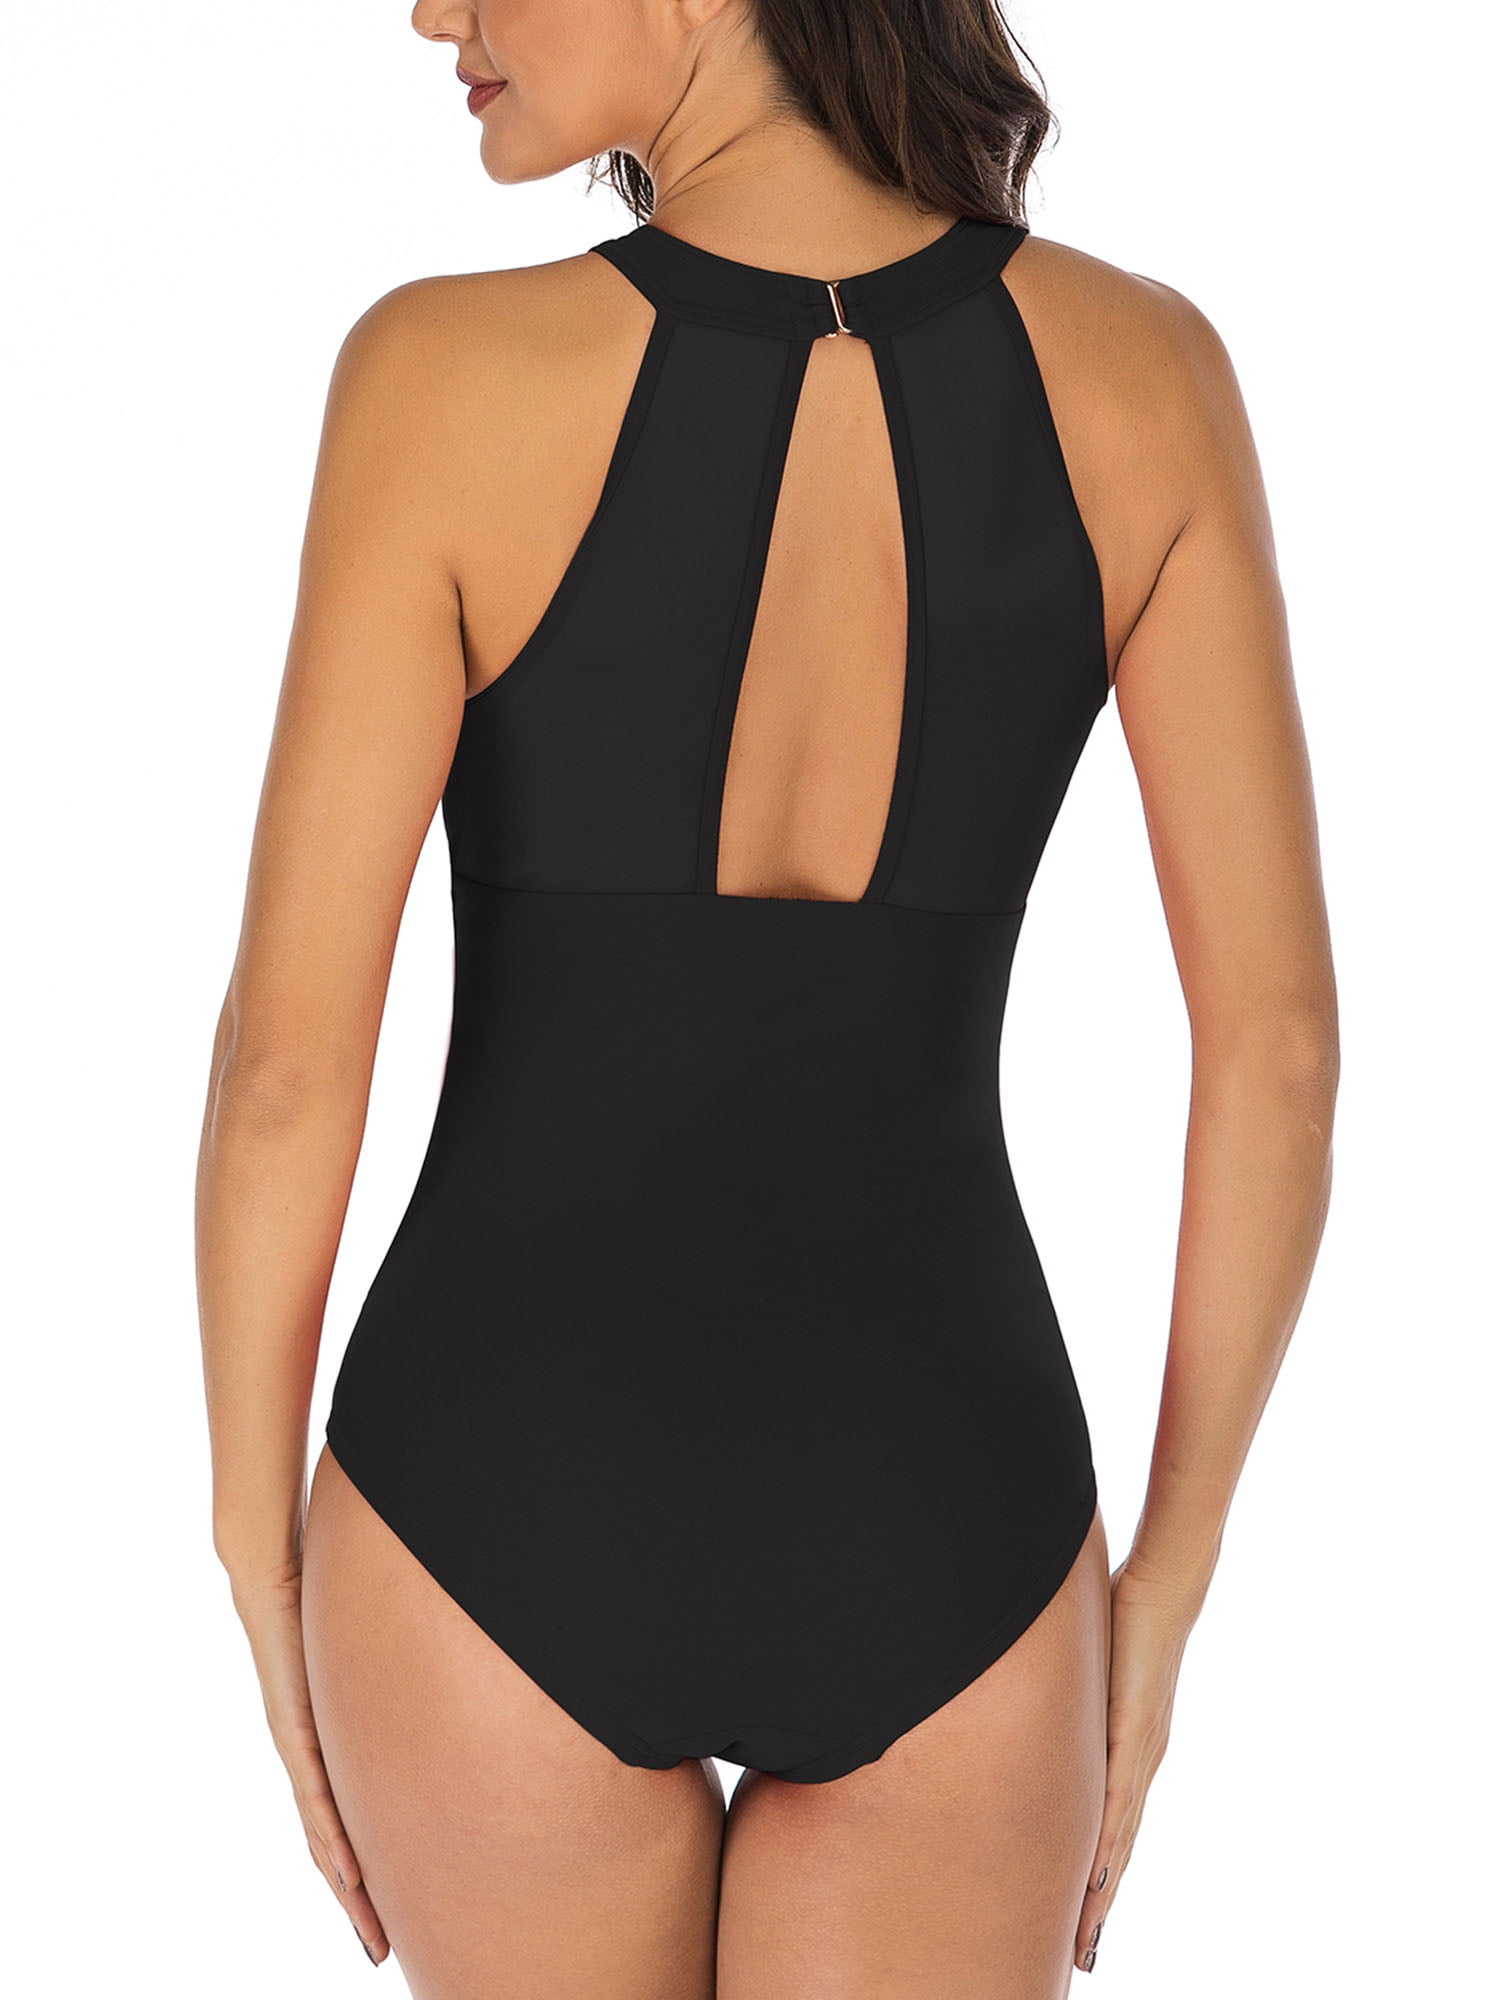 sexy BE WICKED high NECK halter BACKLESS cheeky SWIMSUIT bathing